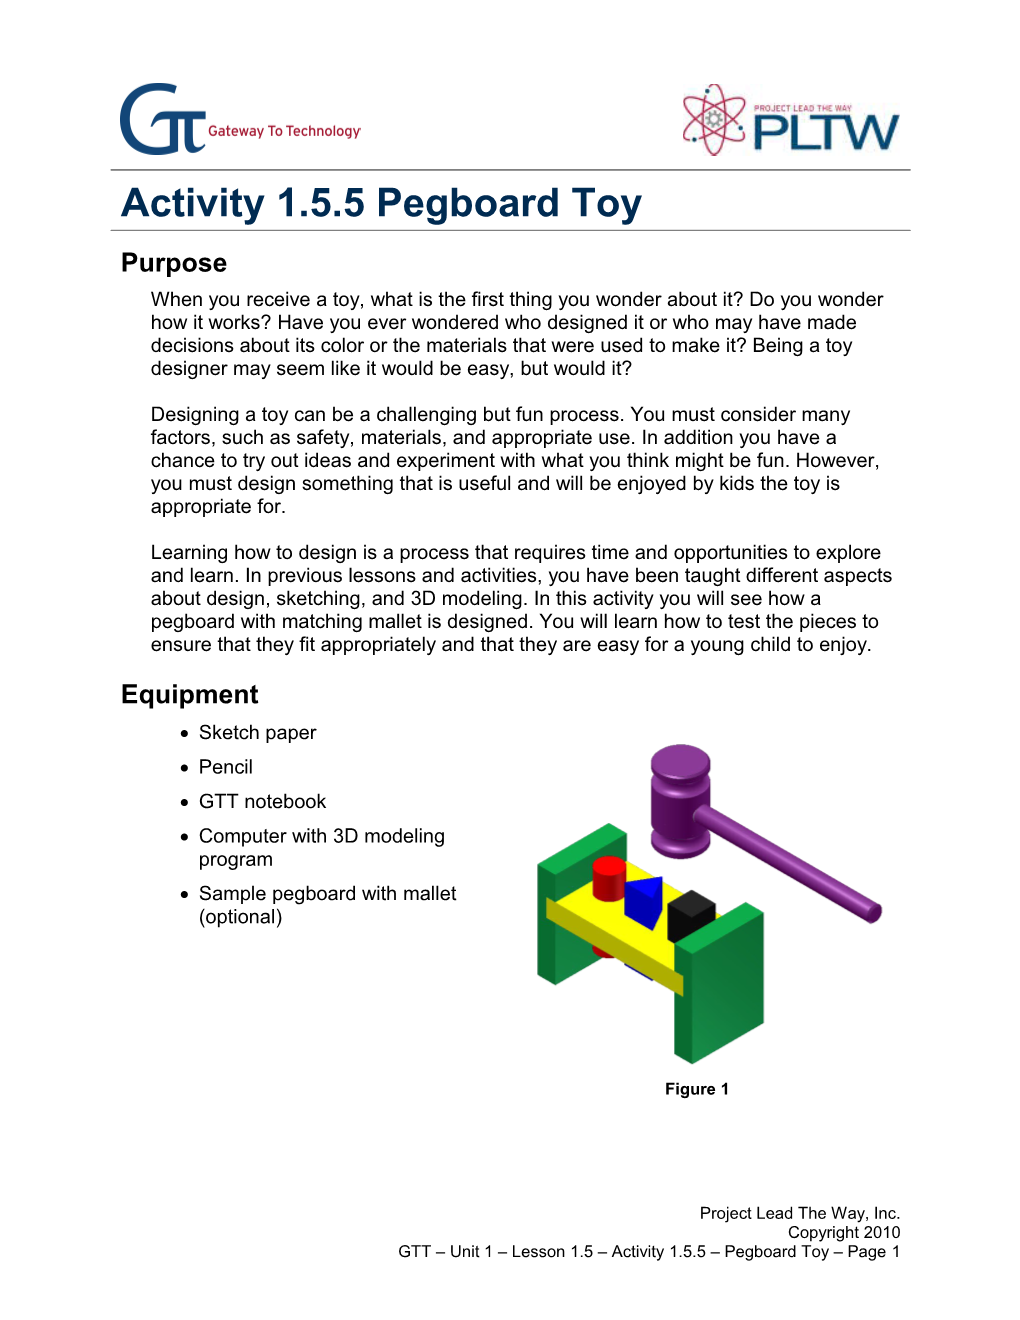 Activity 1.5.5 Pegboard Toy s1